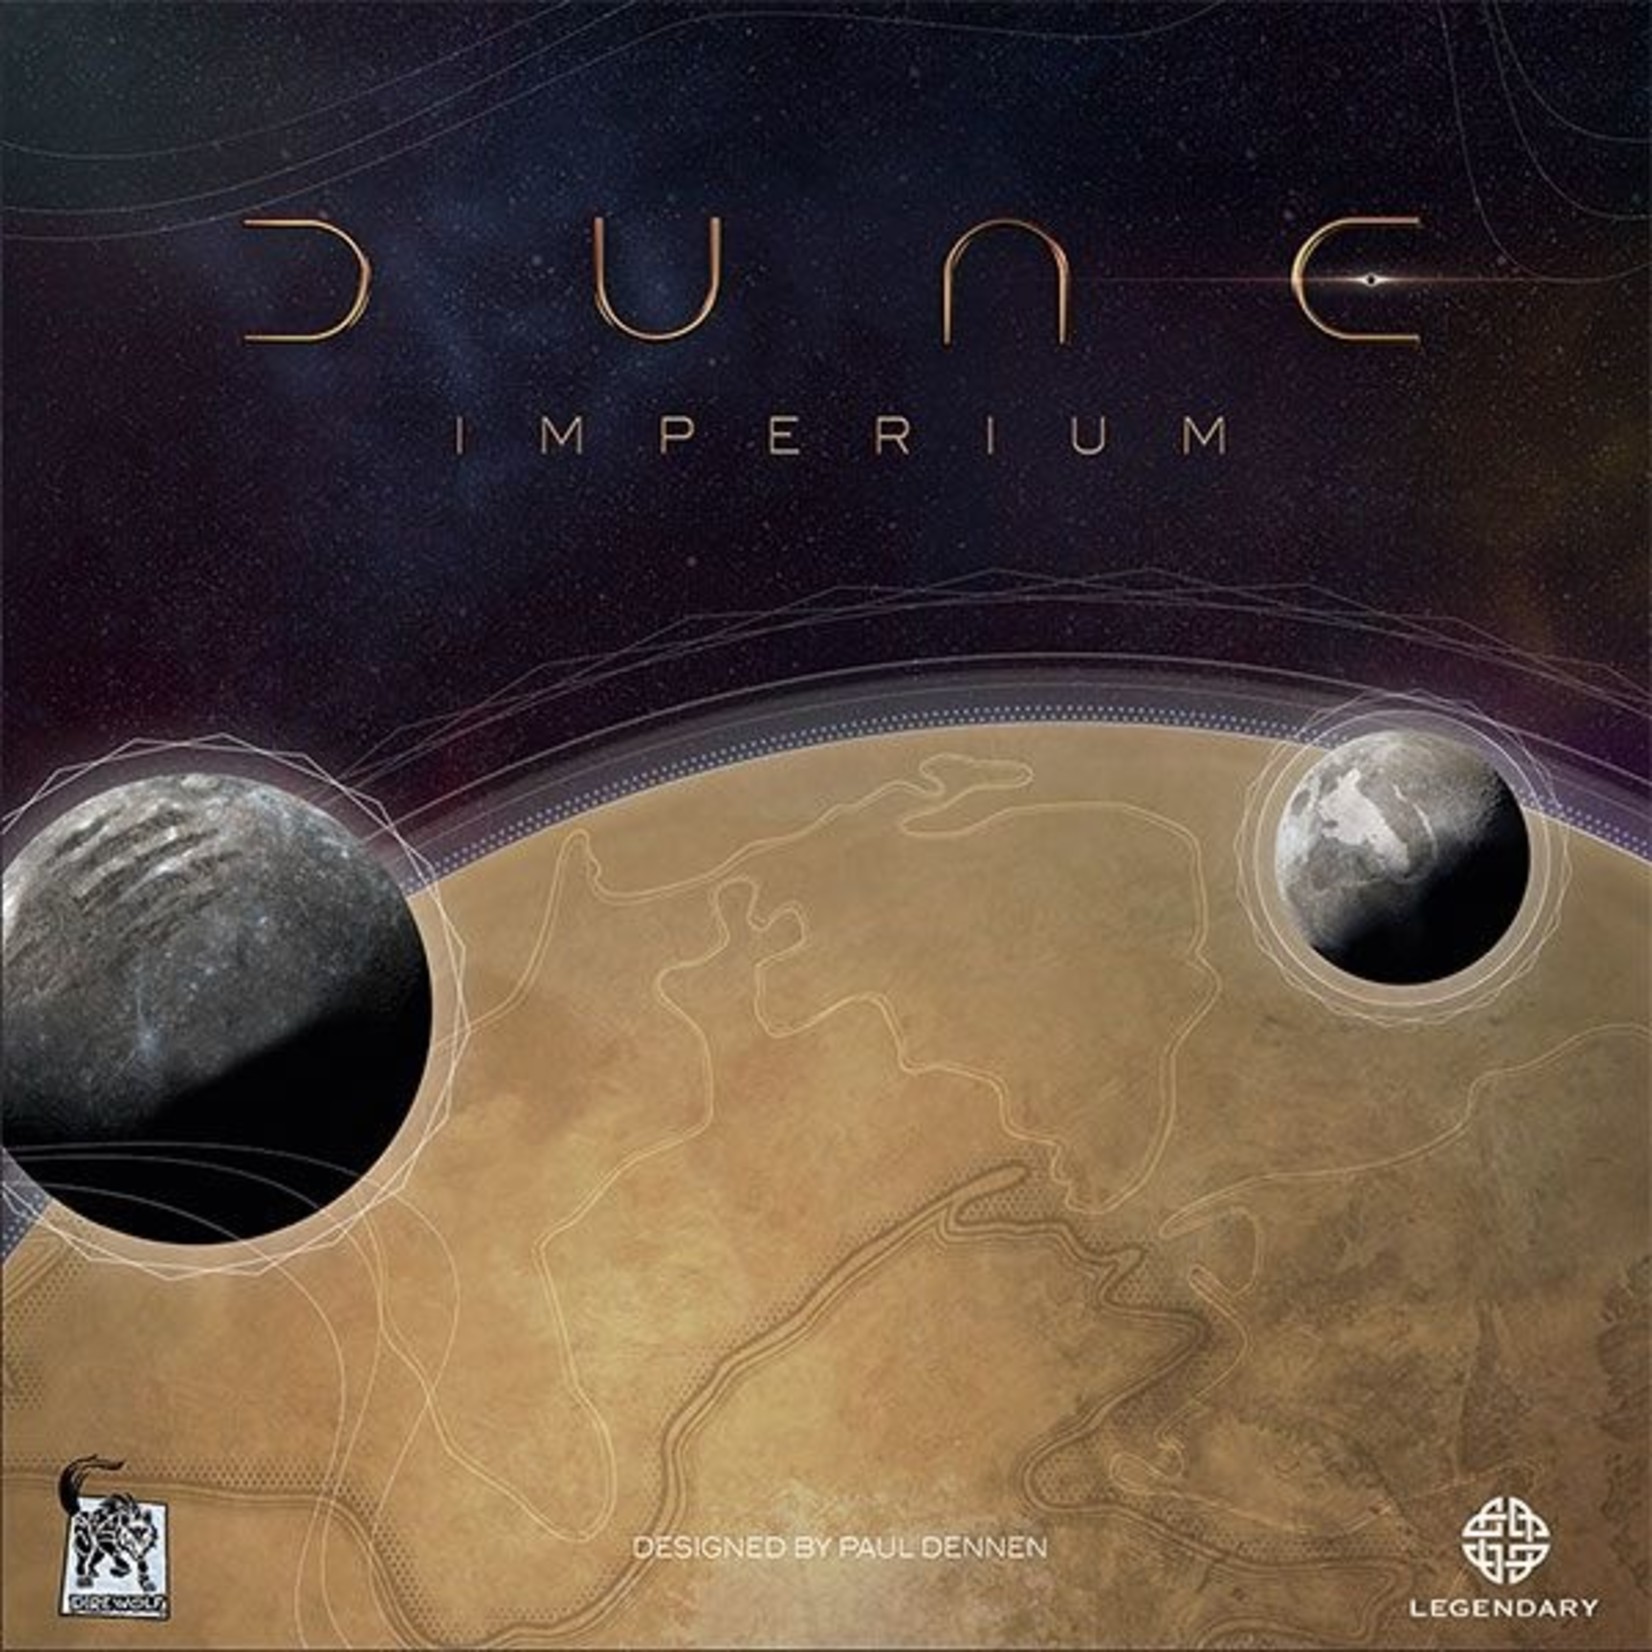 cover art of the board game 'dune imperium' which features a large desert planet at the center with two moons in orbit in front of it